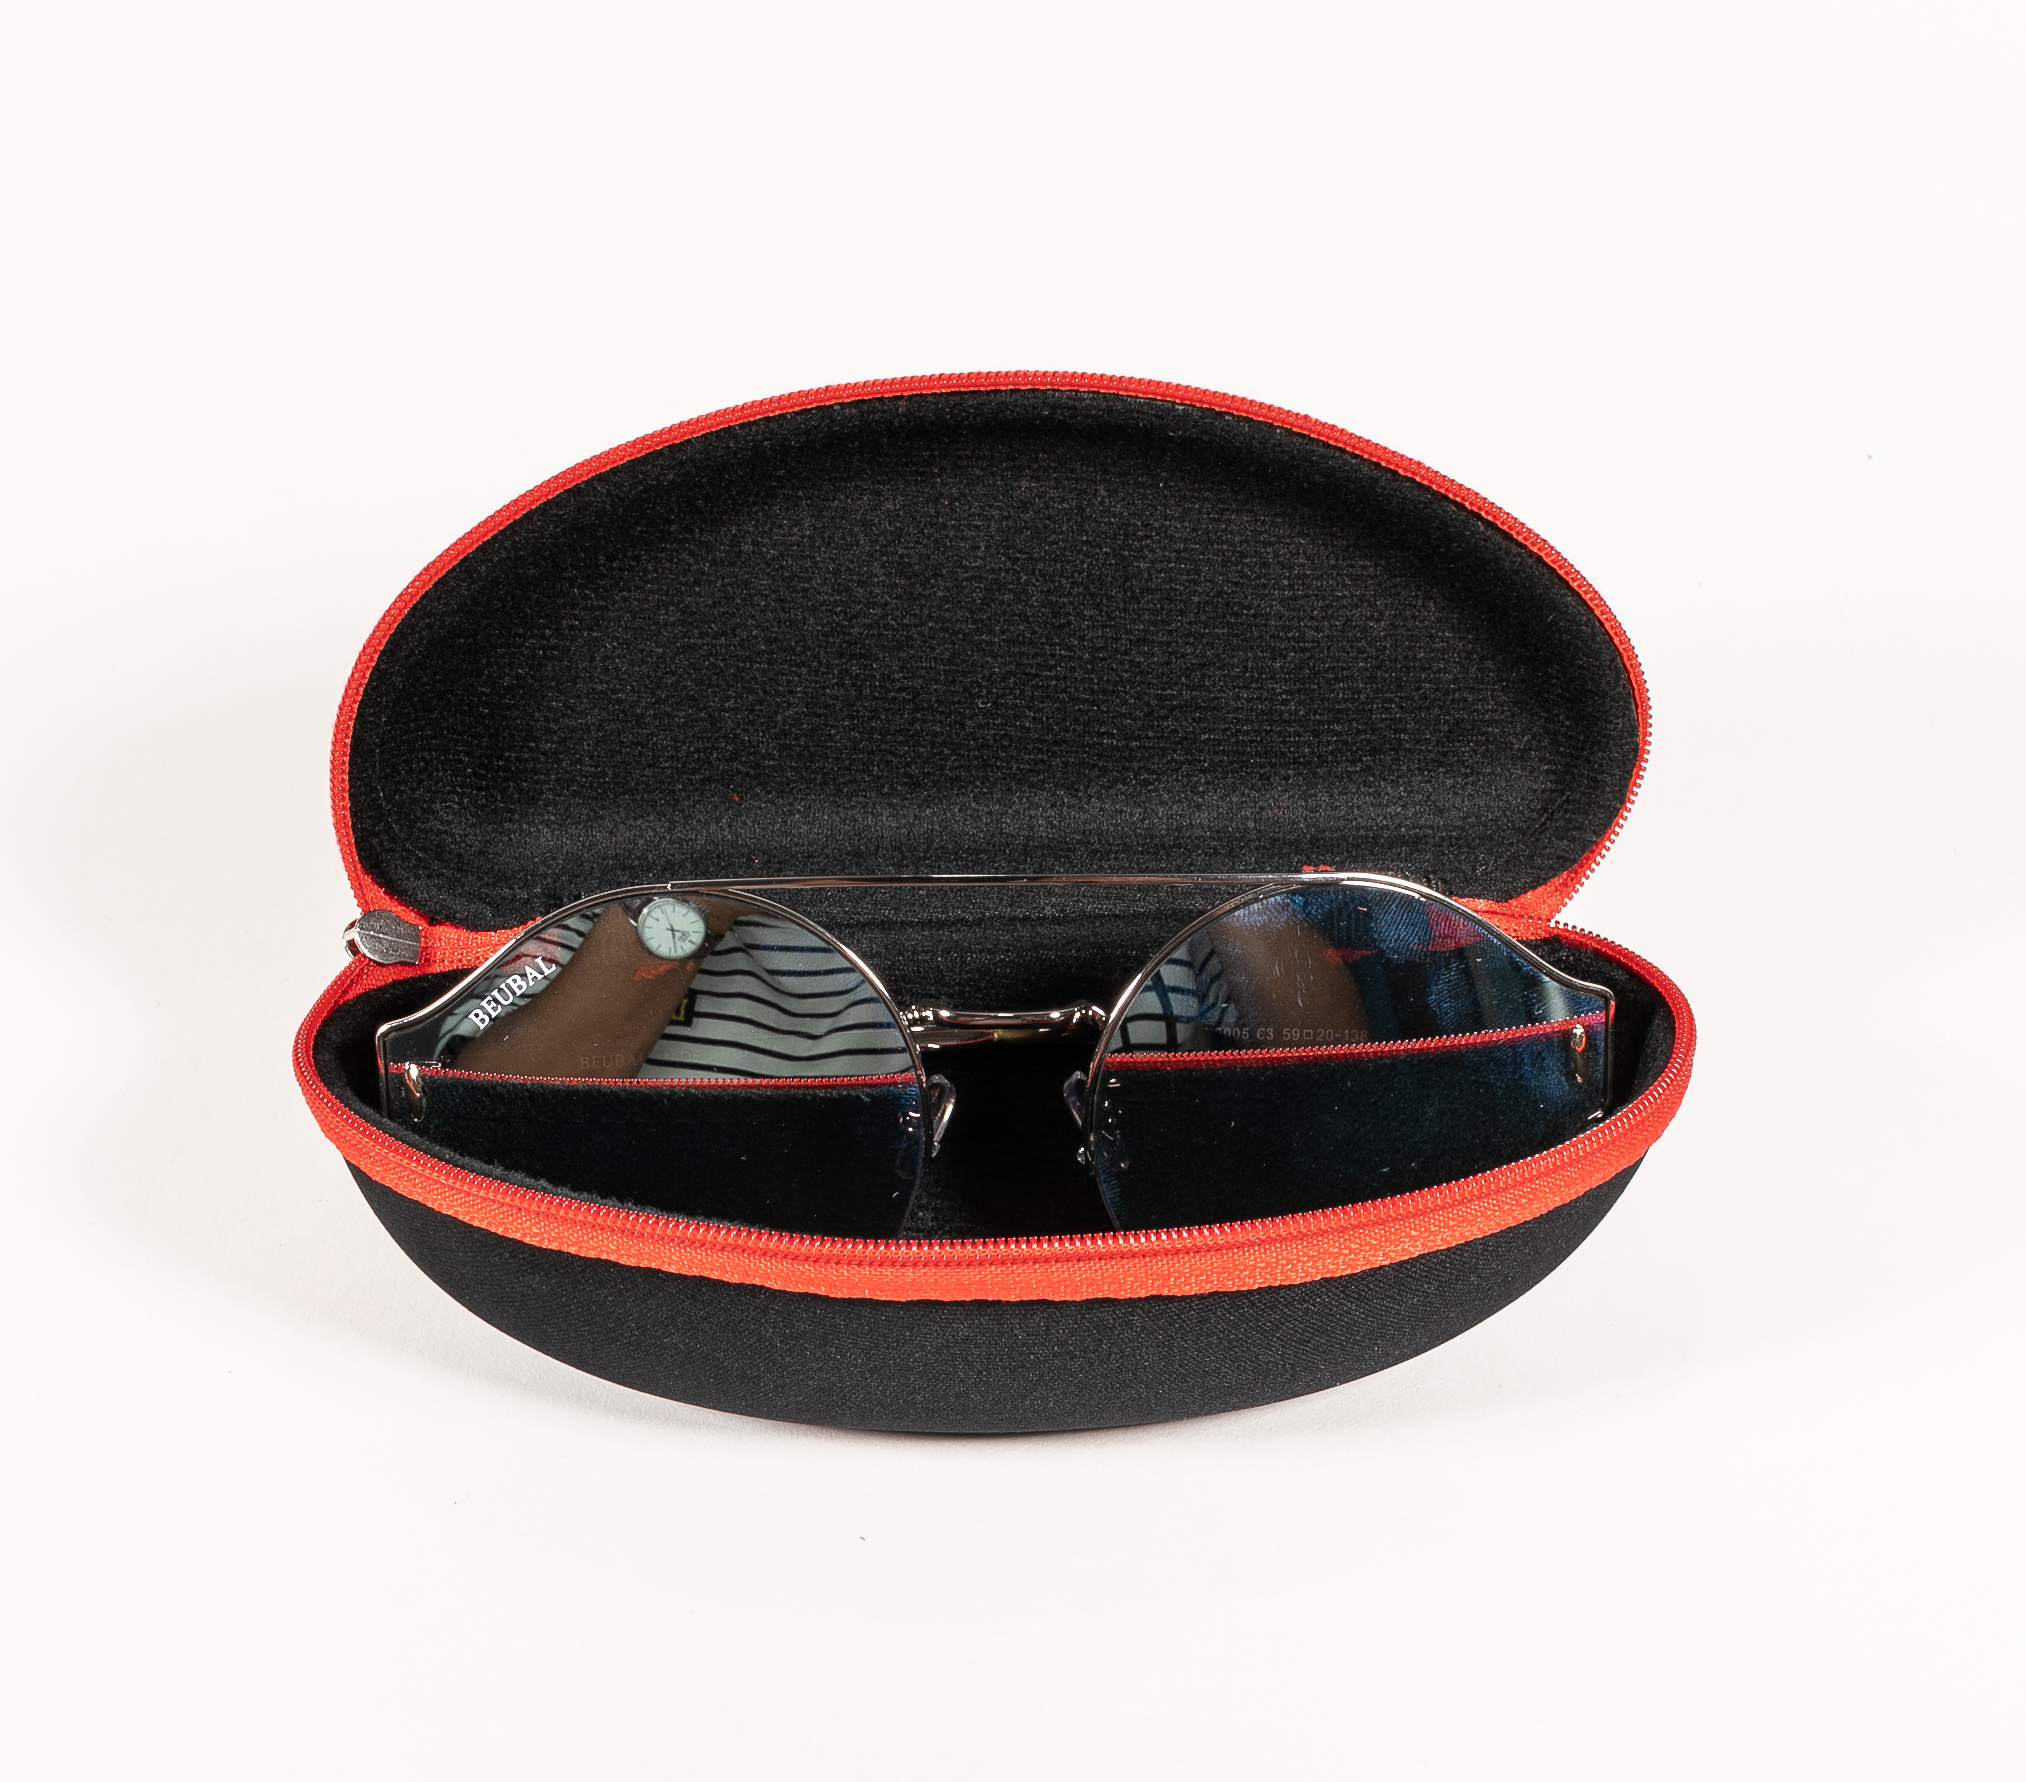 The 2021 Three-color, Zip-top Eyewear Case Looks Like A Fanny Pack